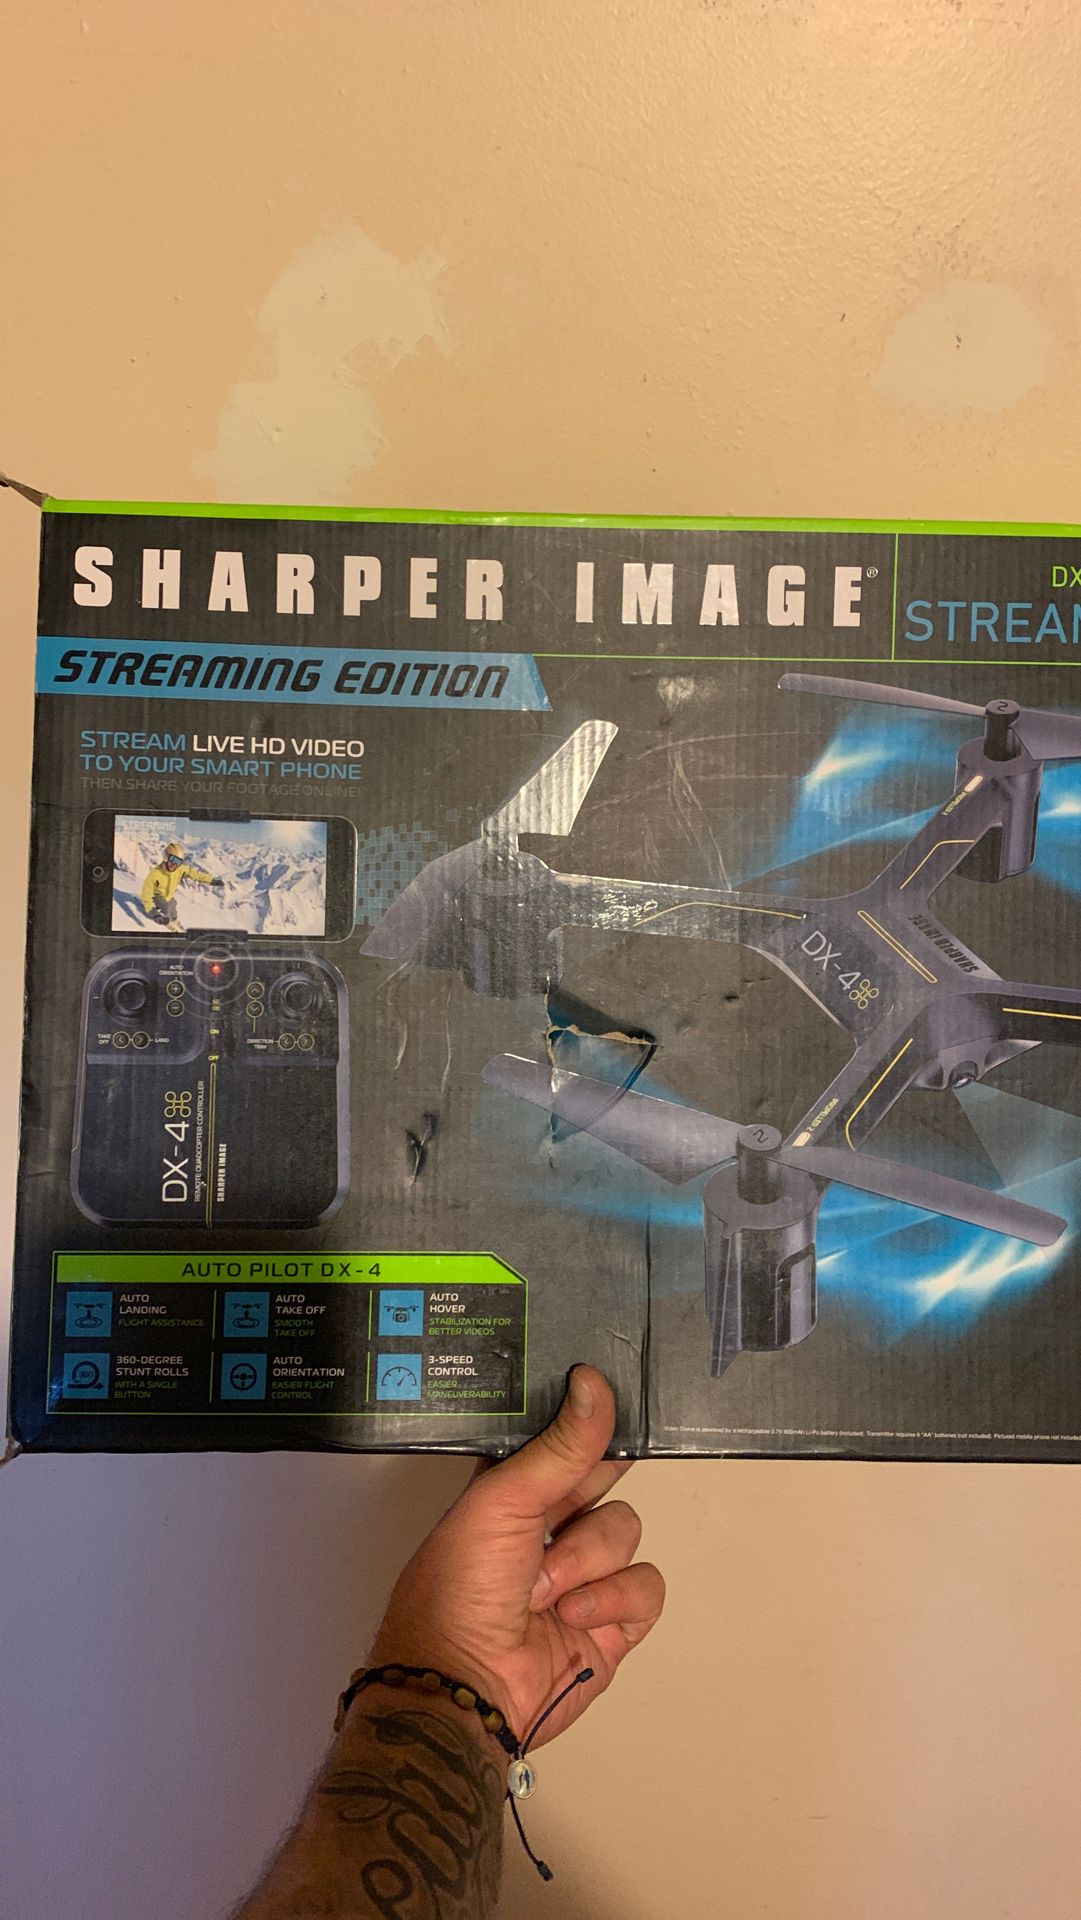 Sharper image DX-4 hd video streaming drone